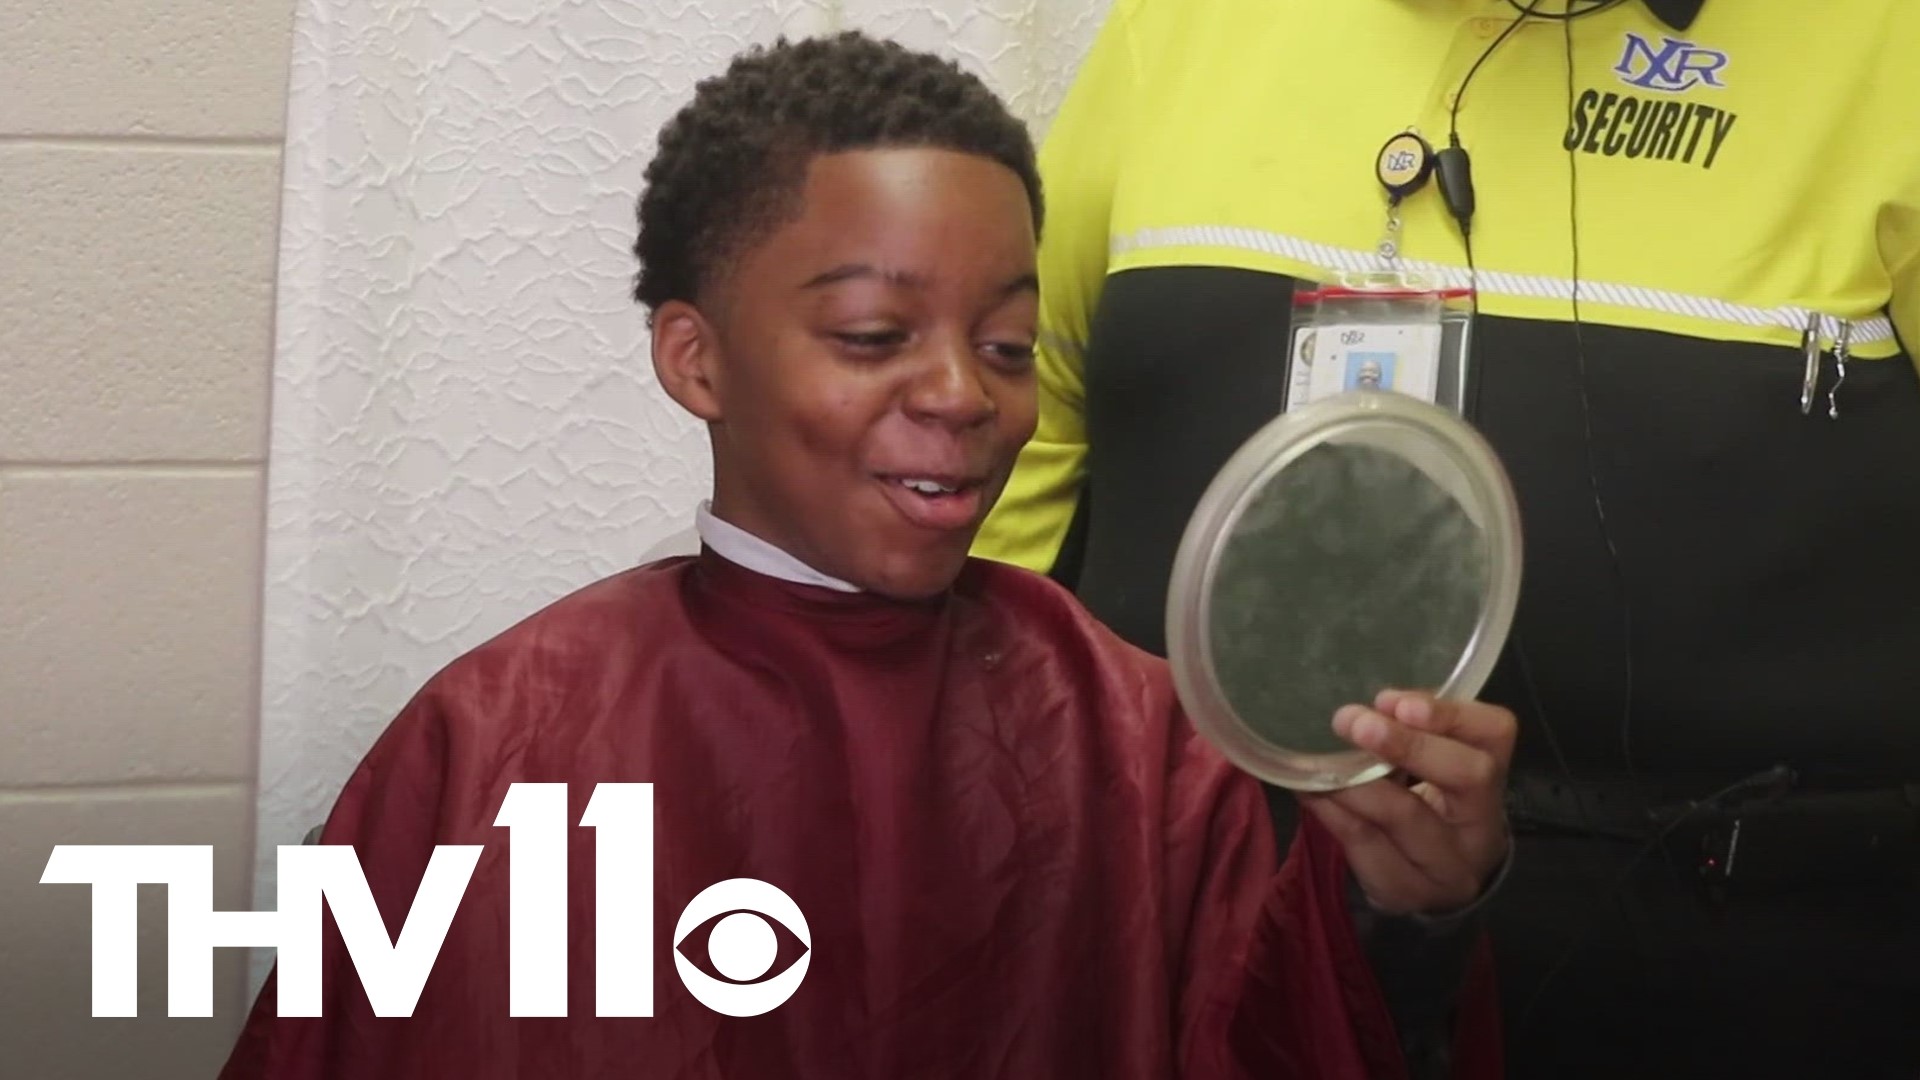 Safety Officer Herman Johnson is spearheading a North Little Rock Middle School program that allows students to get haircuts and advice.